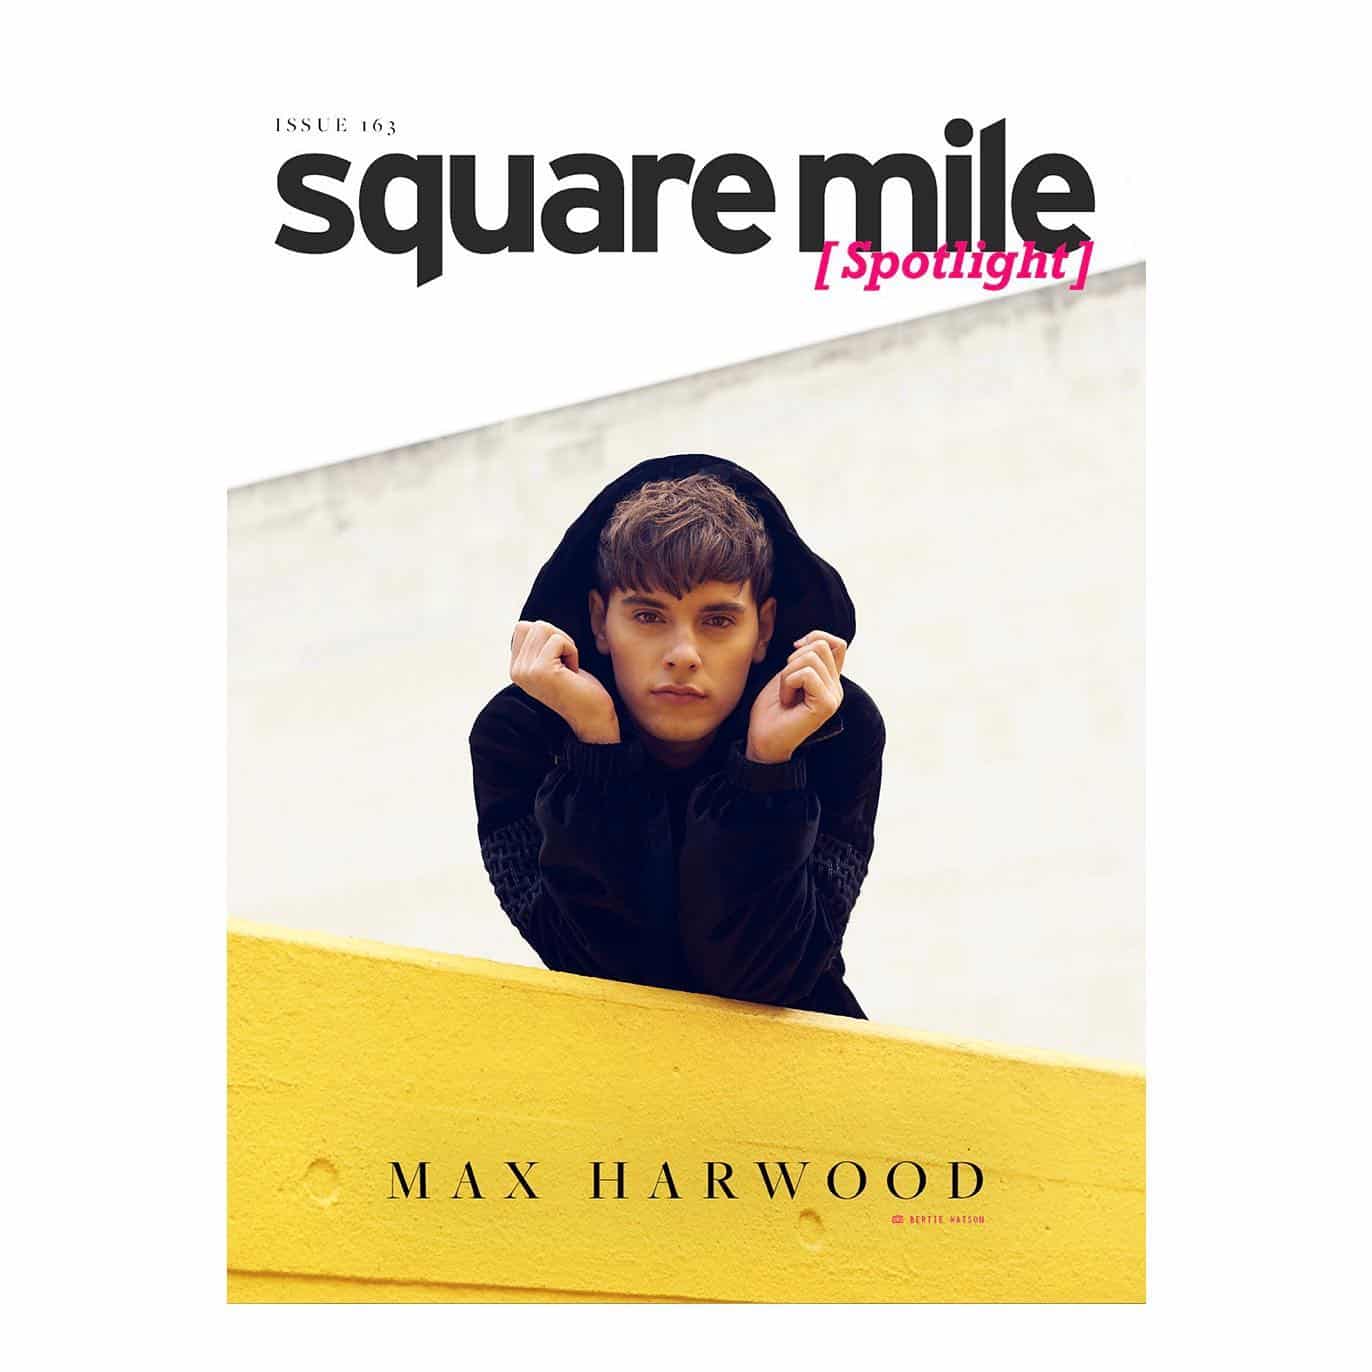 @max.harwood on the digital cover of @squaremile_com discussing @jamiemovie which is out on @primevideouk today 
.
.
.
📸 @mrbertiewatson 
‍♂️ @nadiaaltinbas 
 @olgatimofejeva 
.
.